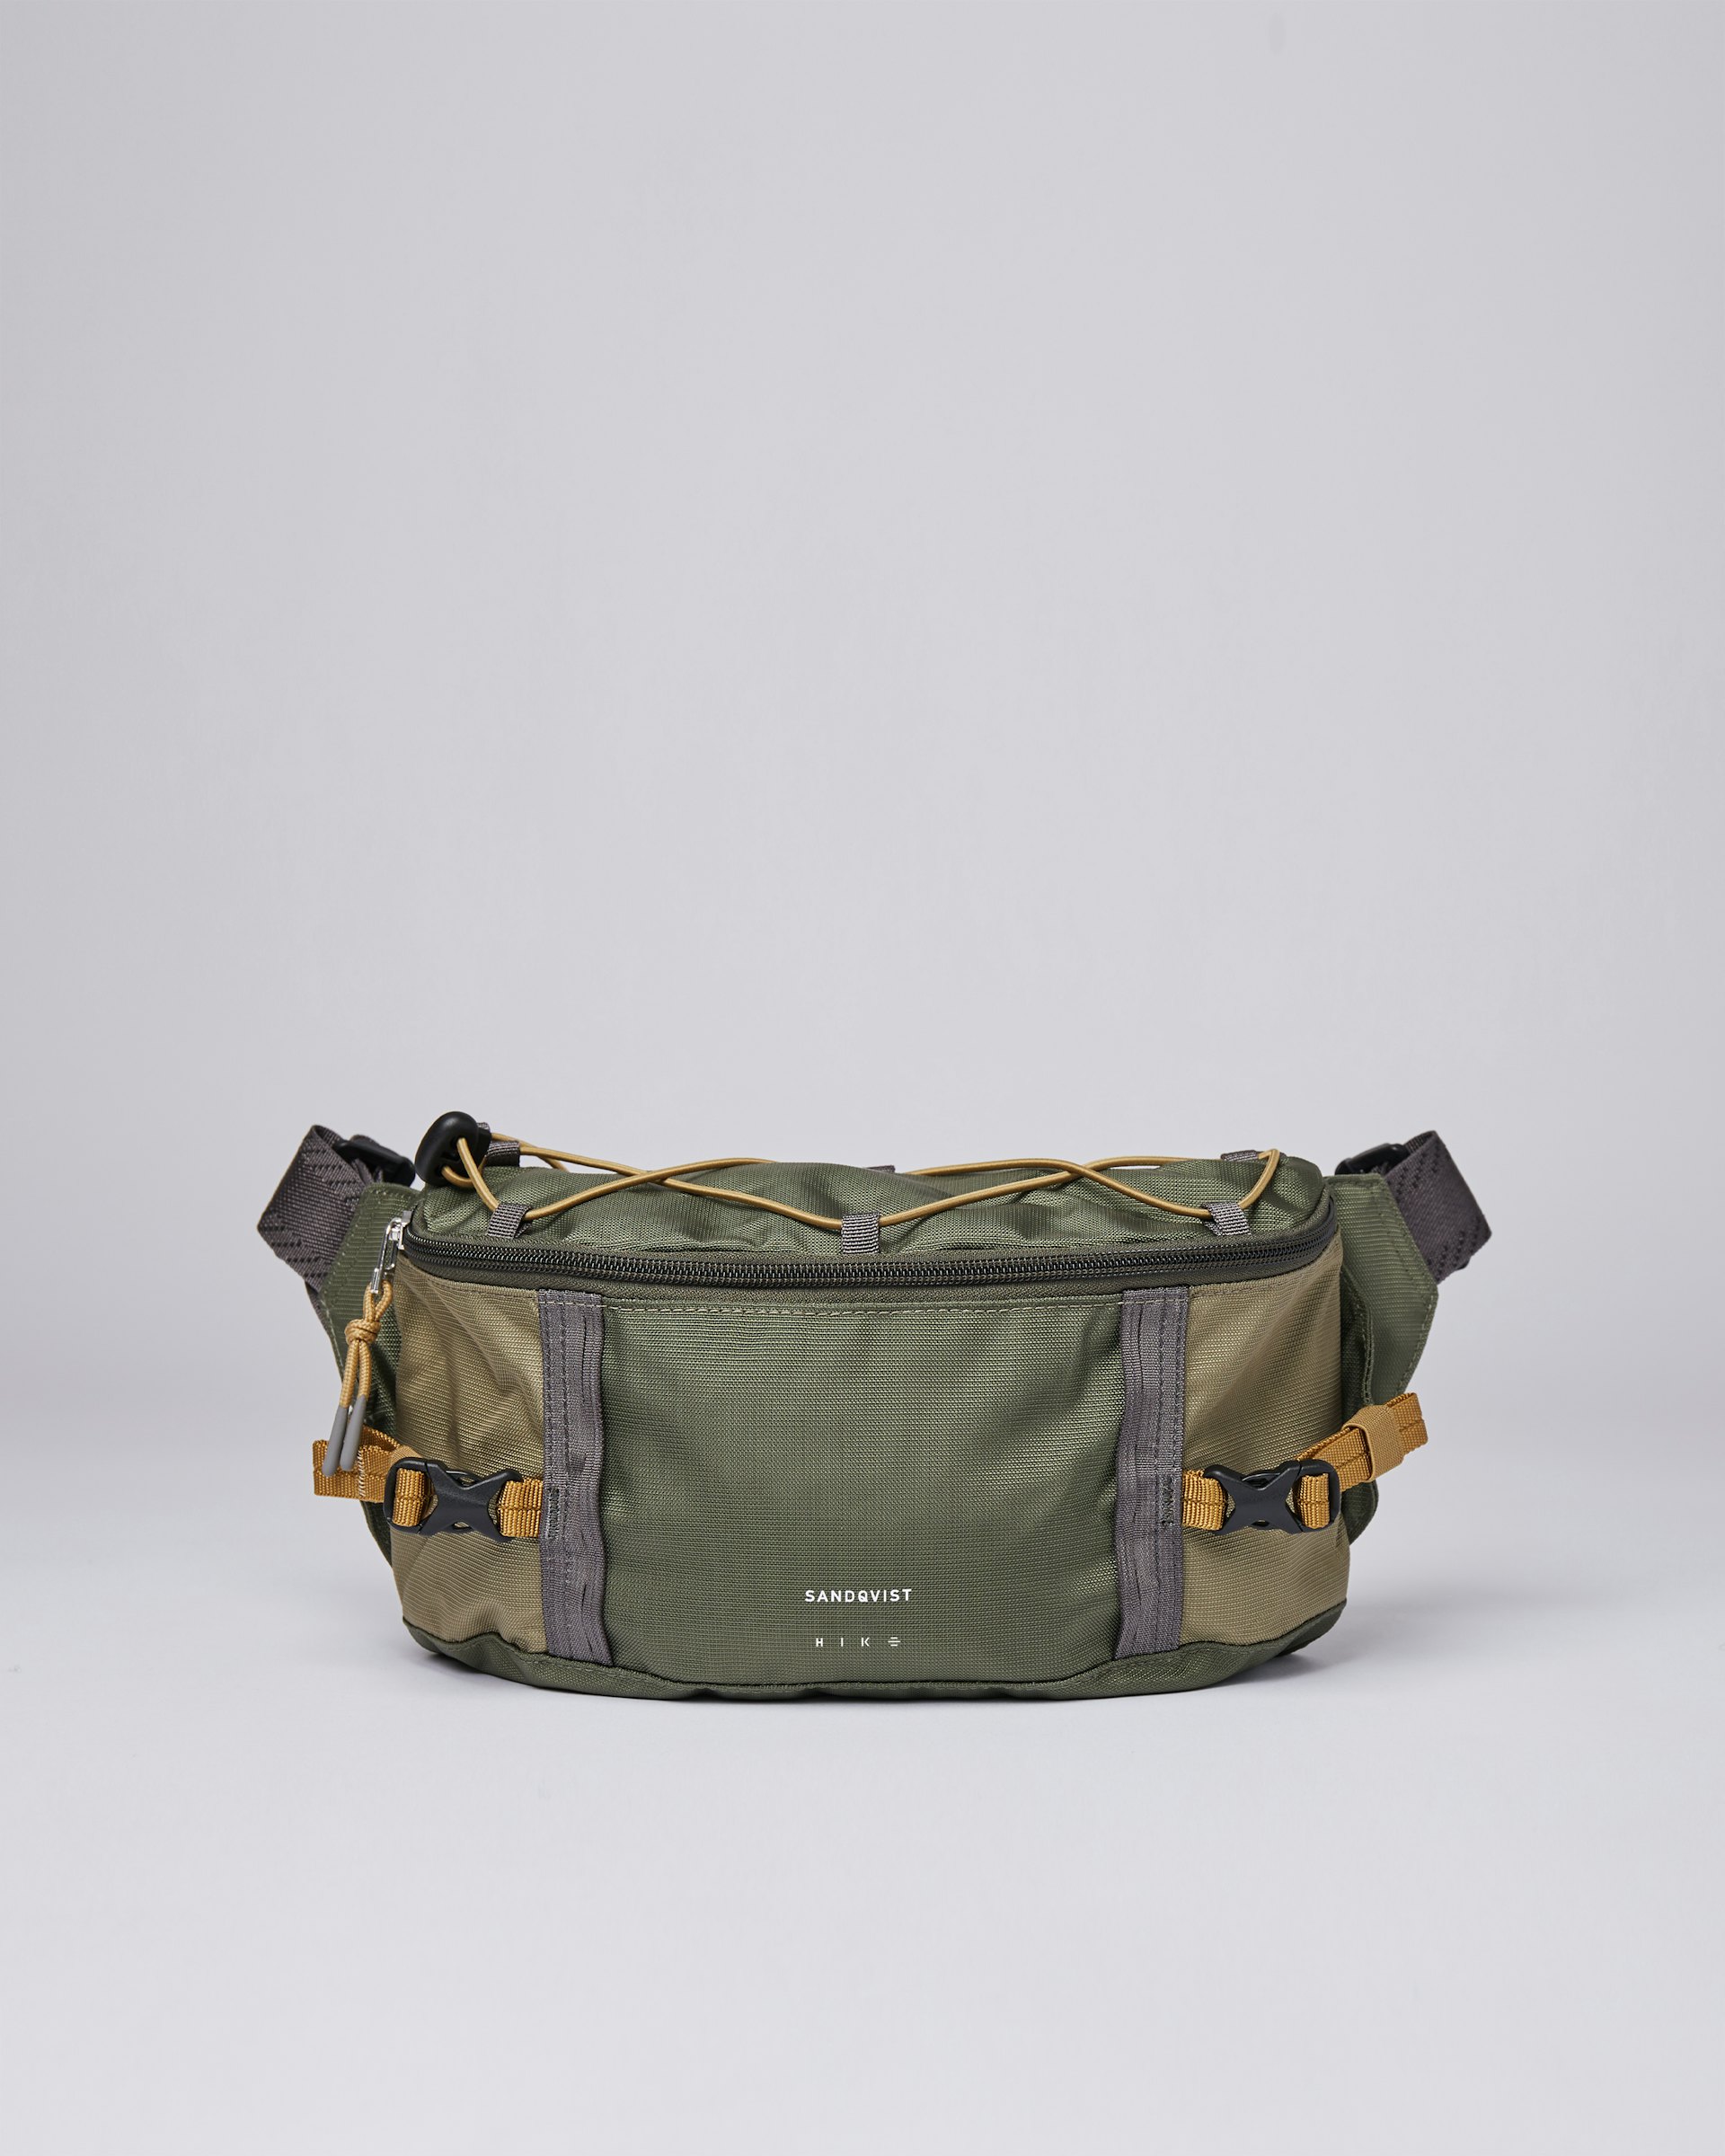 Allterrain Hike belongs to the category Bum bags and is in color green & green (1 of 7)